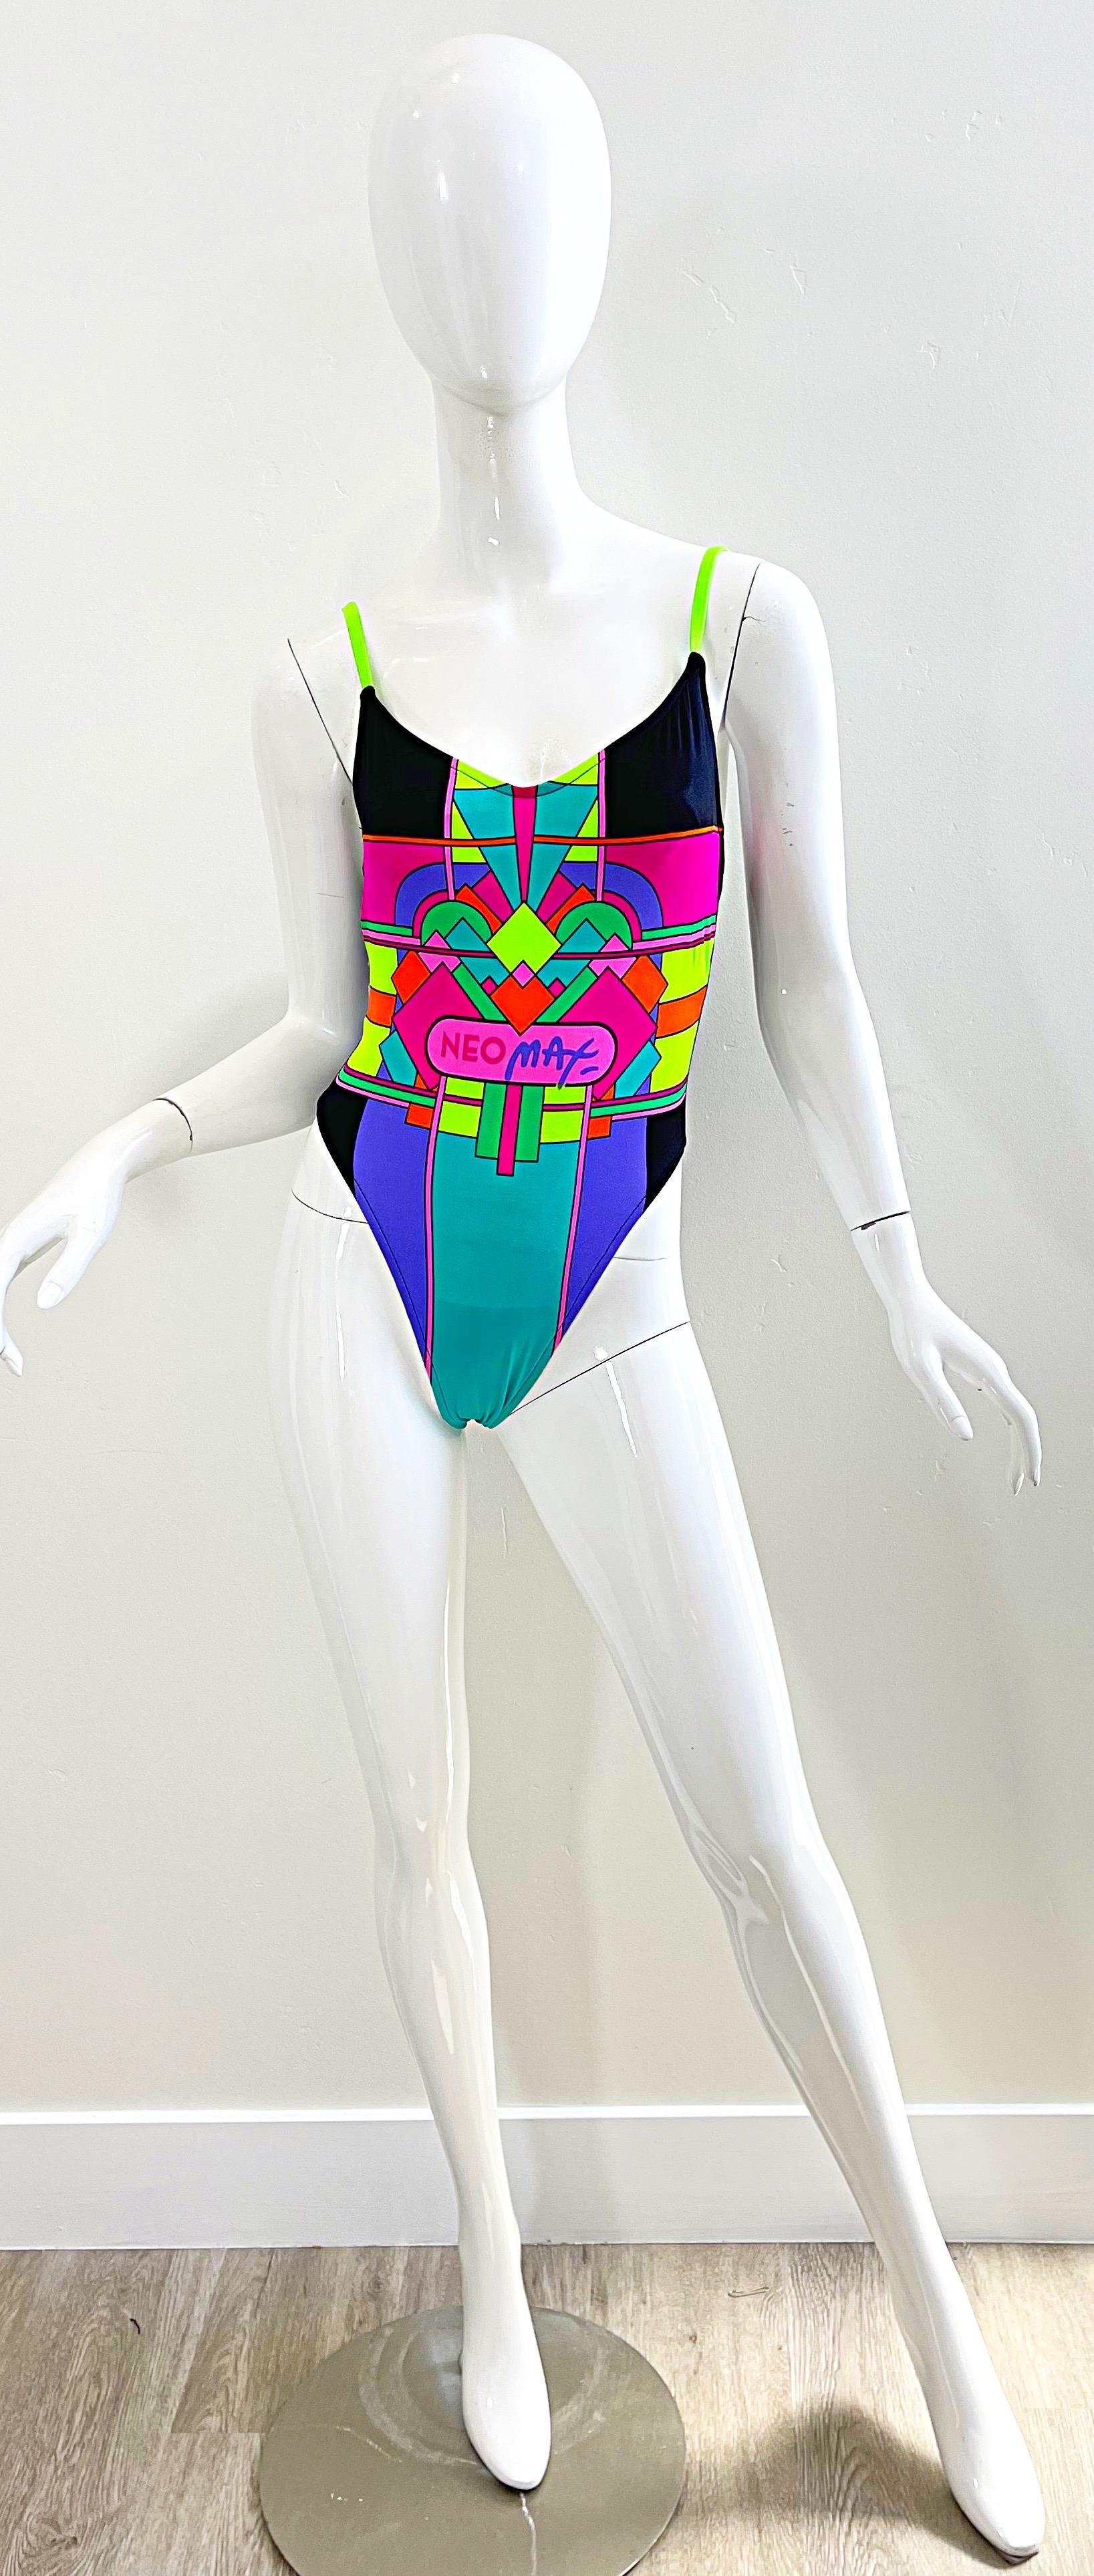 NWT 1980s Peter Max Neomax Neon Abstract Art Print One Piece Swimsuit Bodysuit For Sale 1